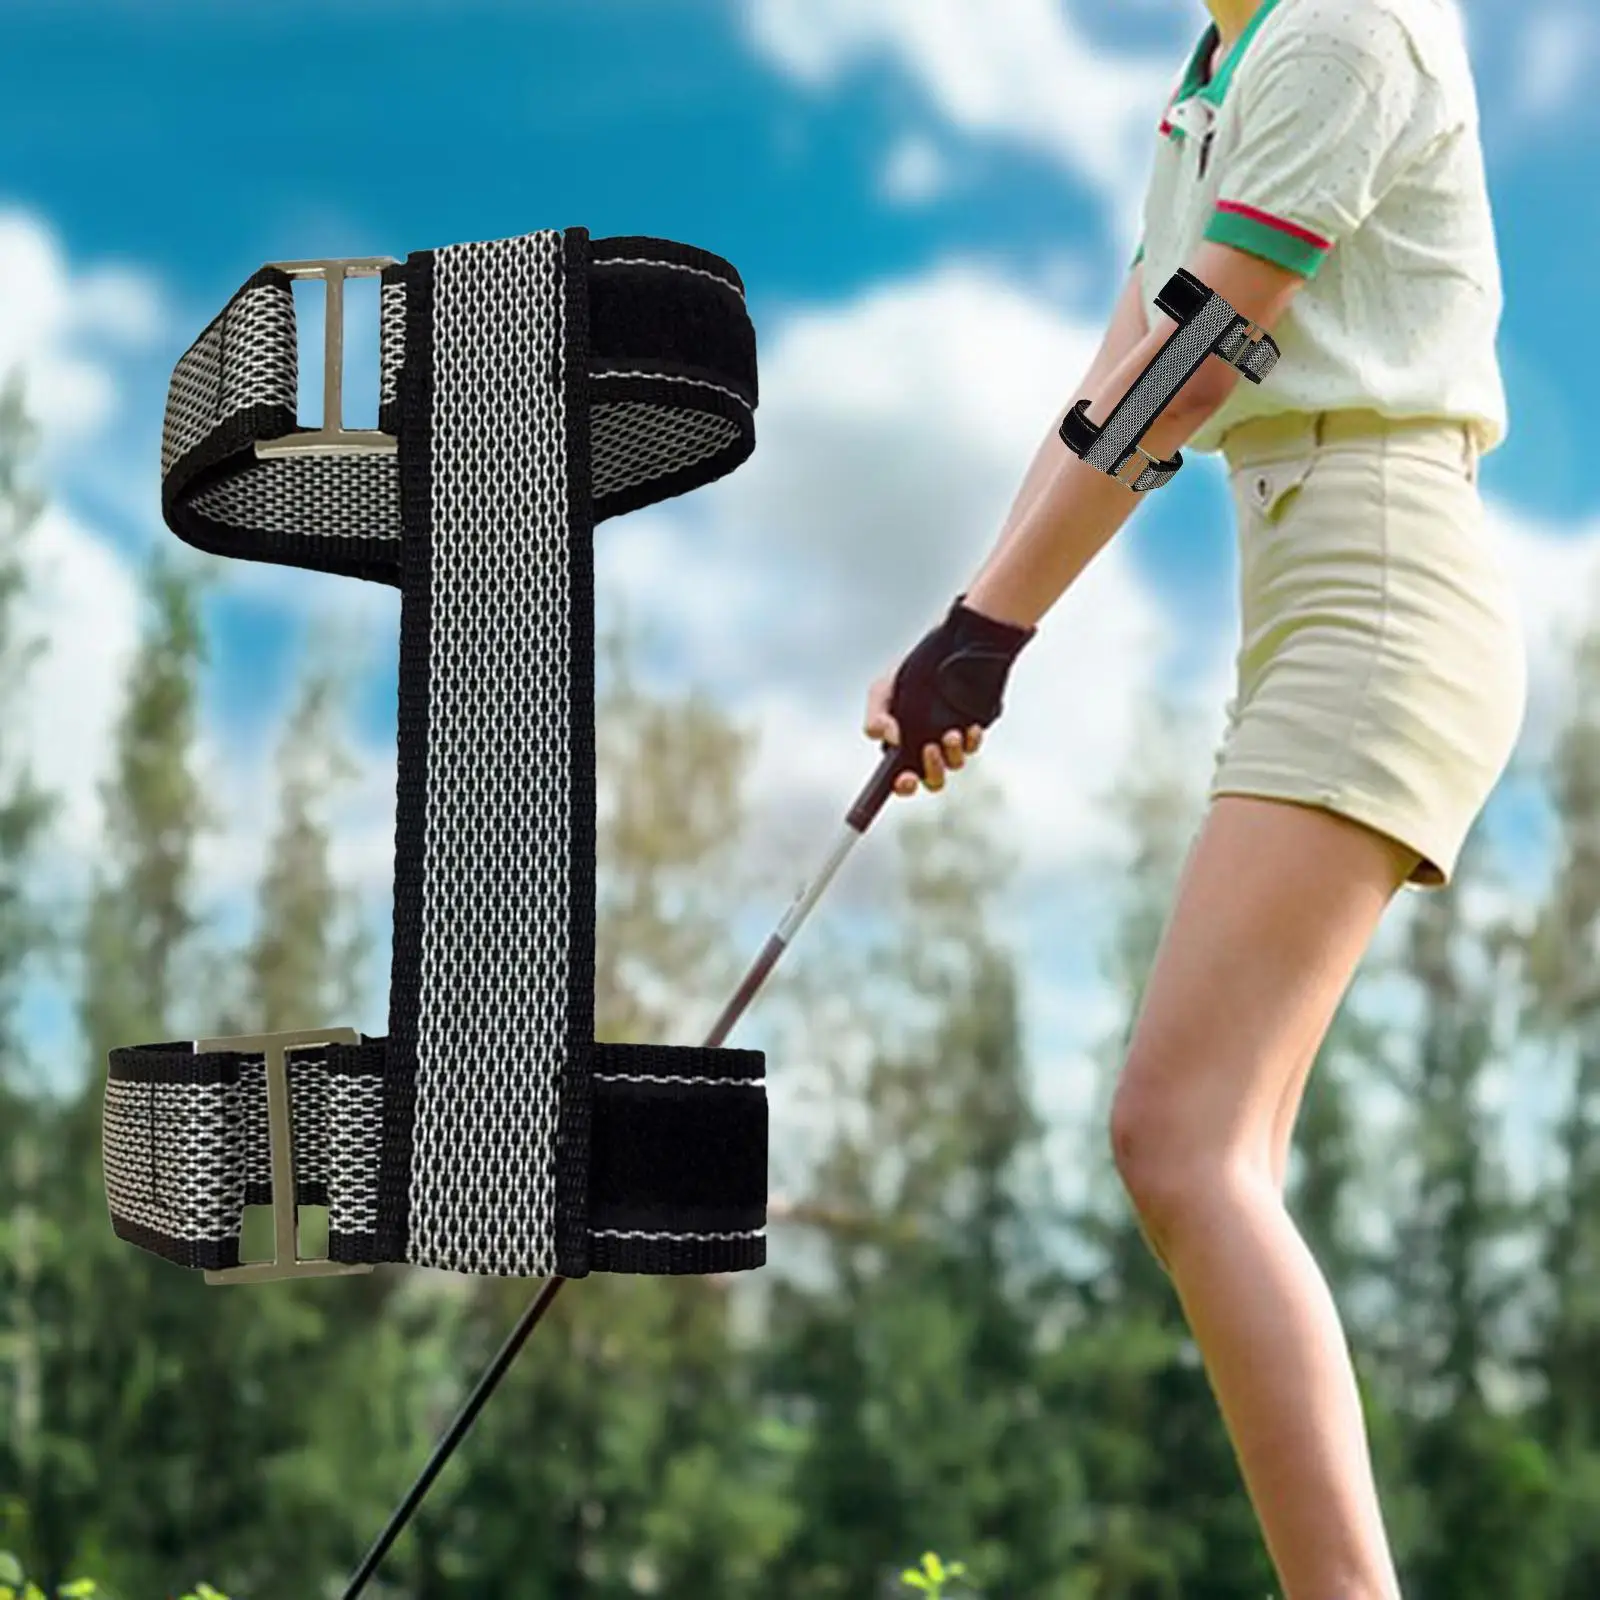 Golf Training Aid Supplies Equipment Practice Assist Auxiliary Golf Swing Trainer Golf Wrist Corrector Swing for Golf Training